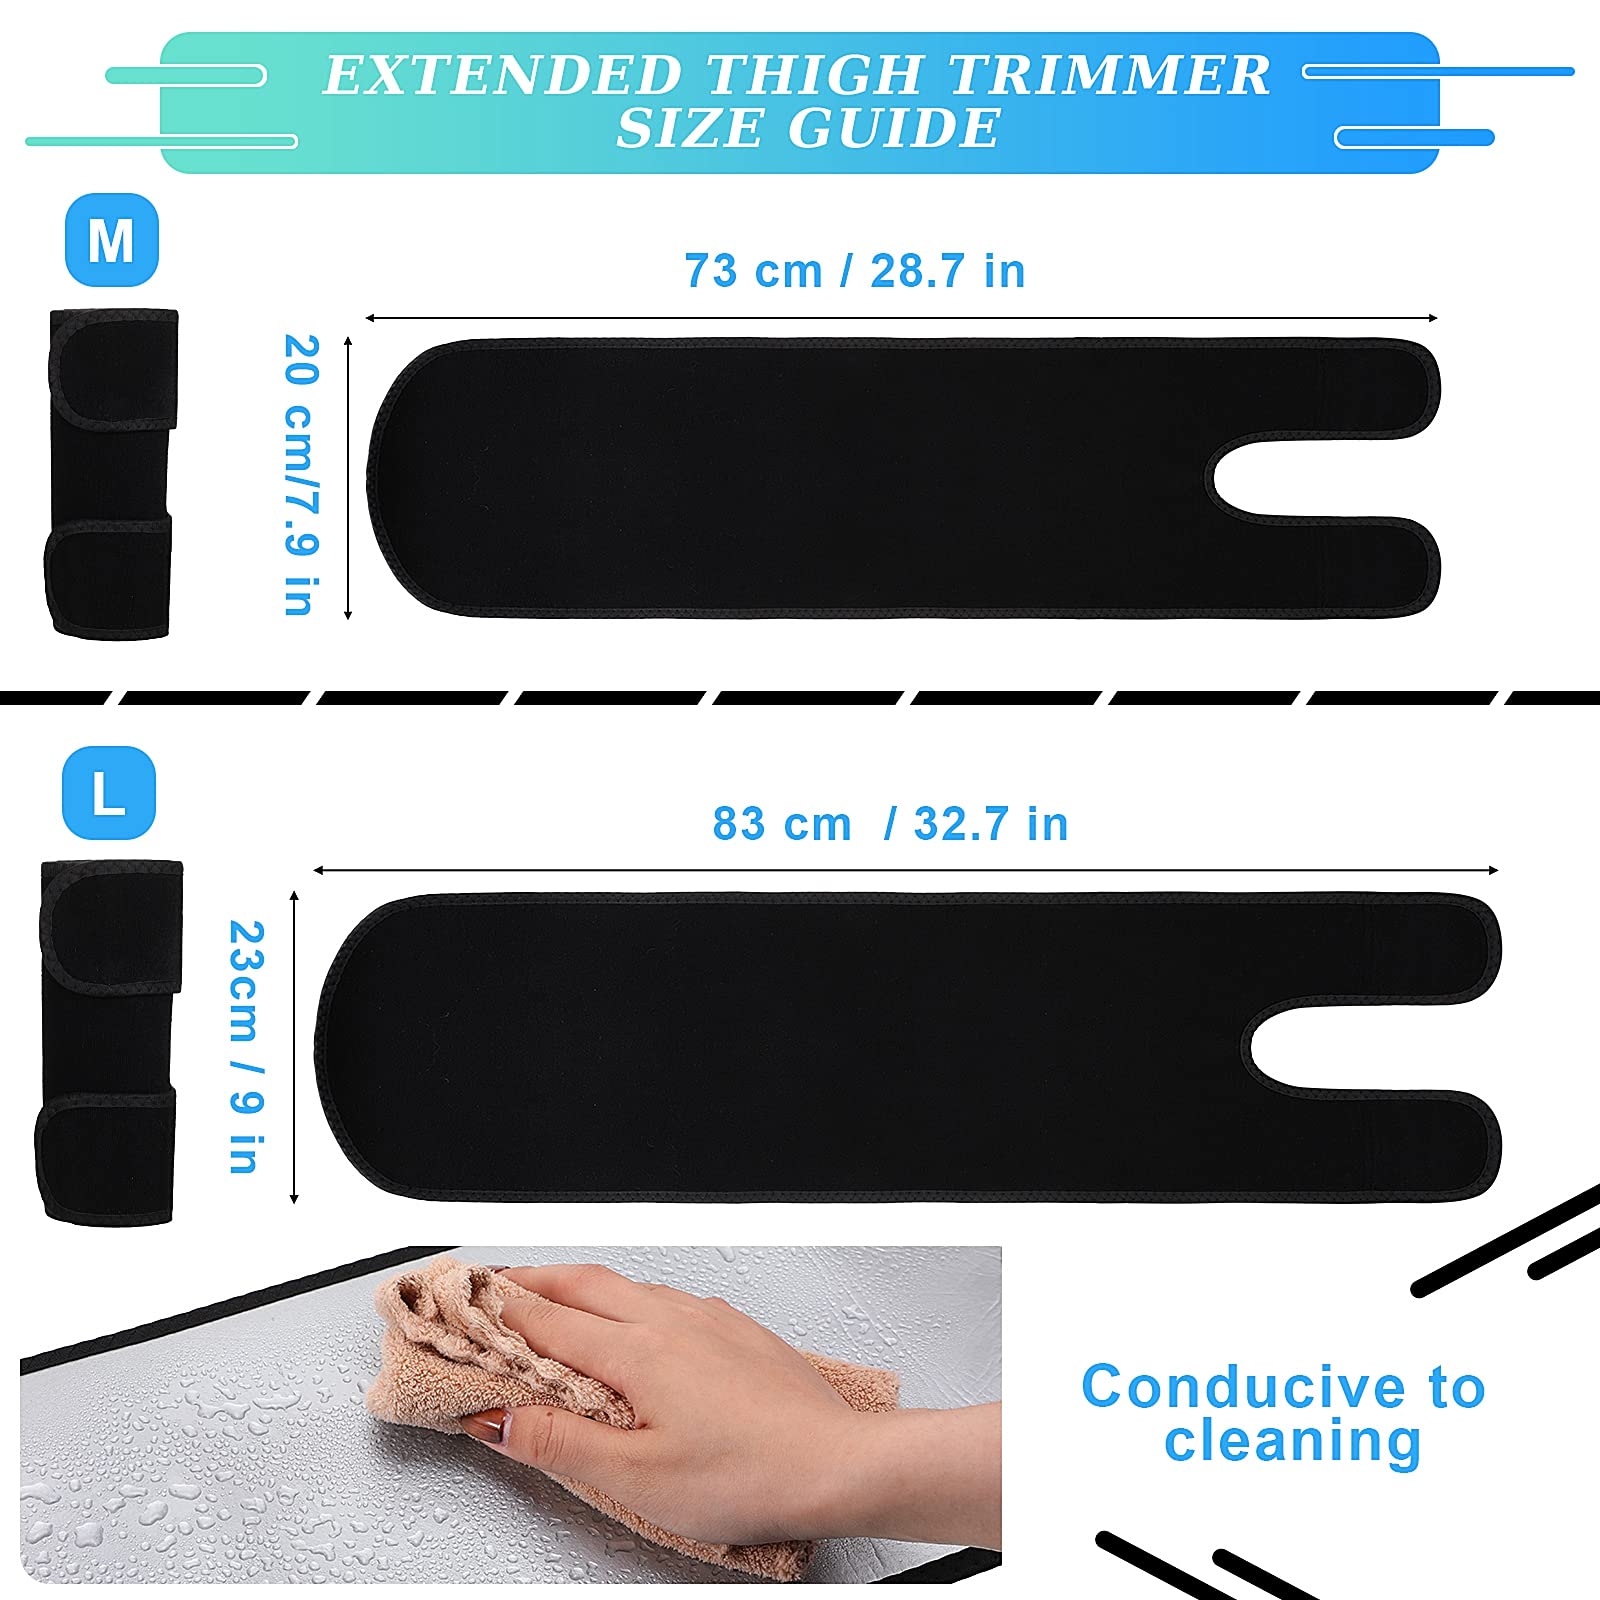 Neoprene Sauna Thigh Trimmer Shaper Wraps for Weight Loss - China